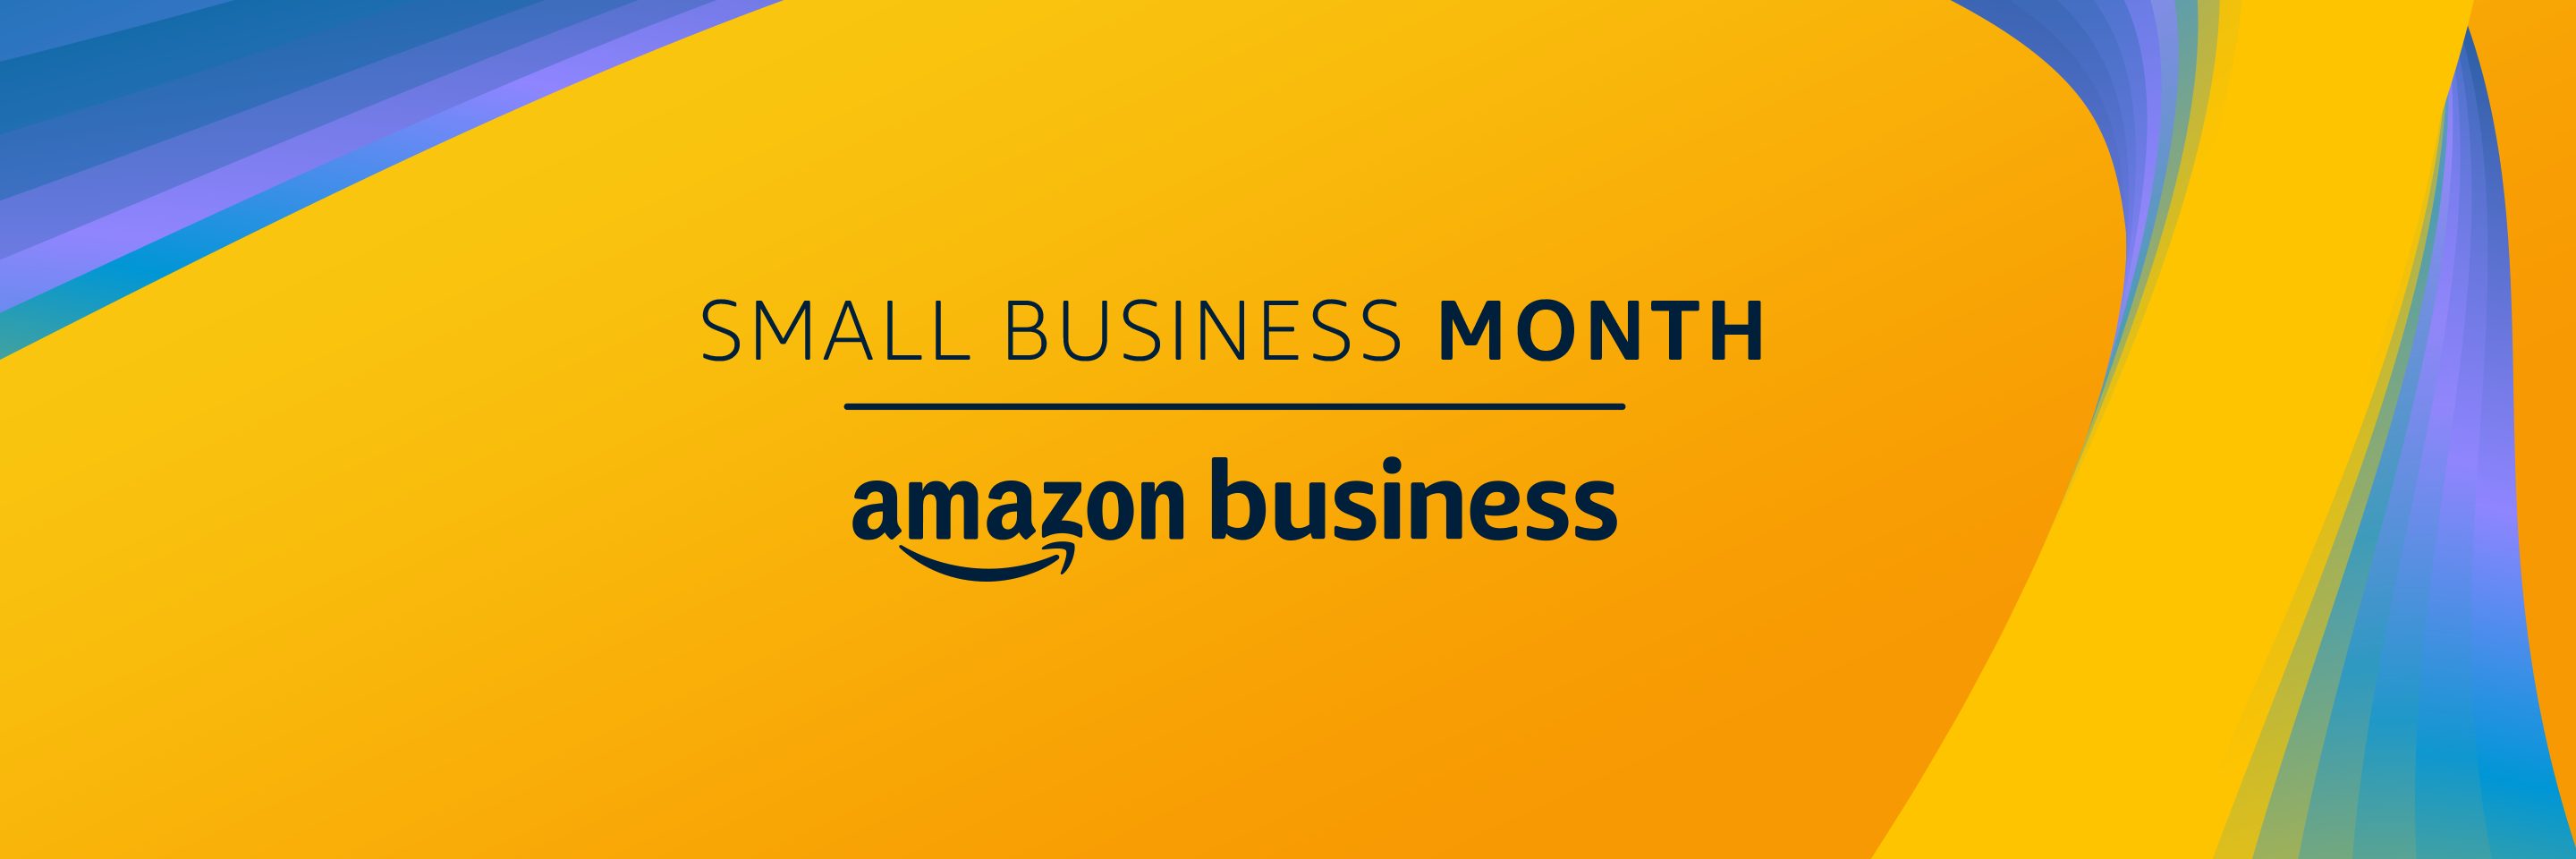 Announcing Amazon Business Small Business Month Deals